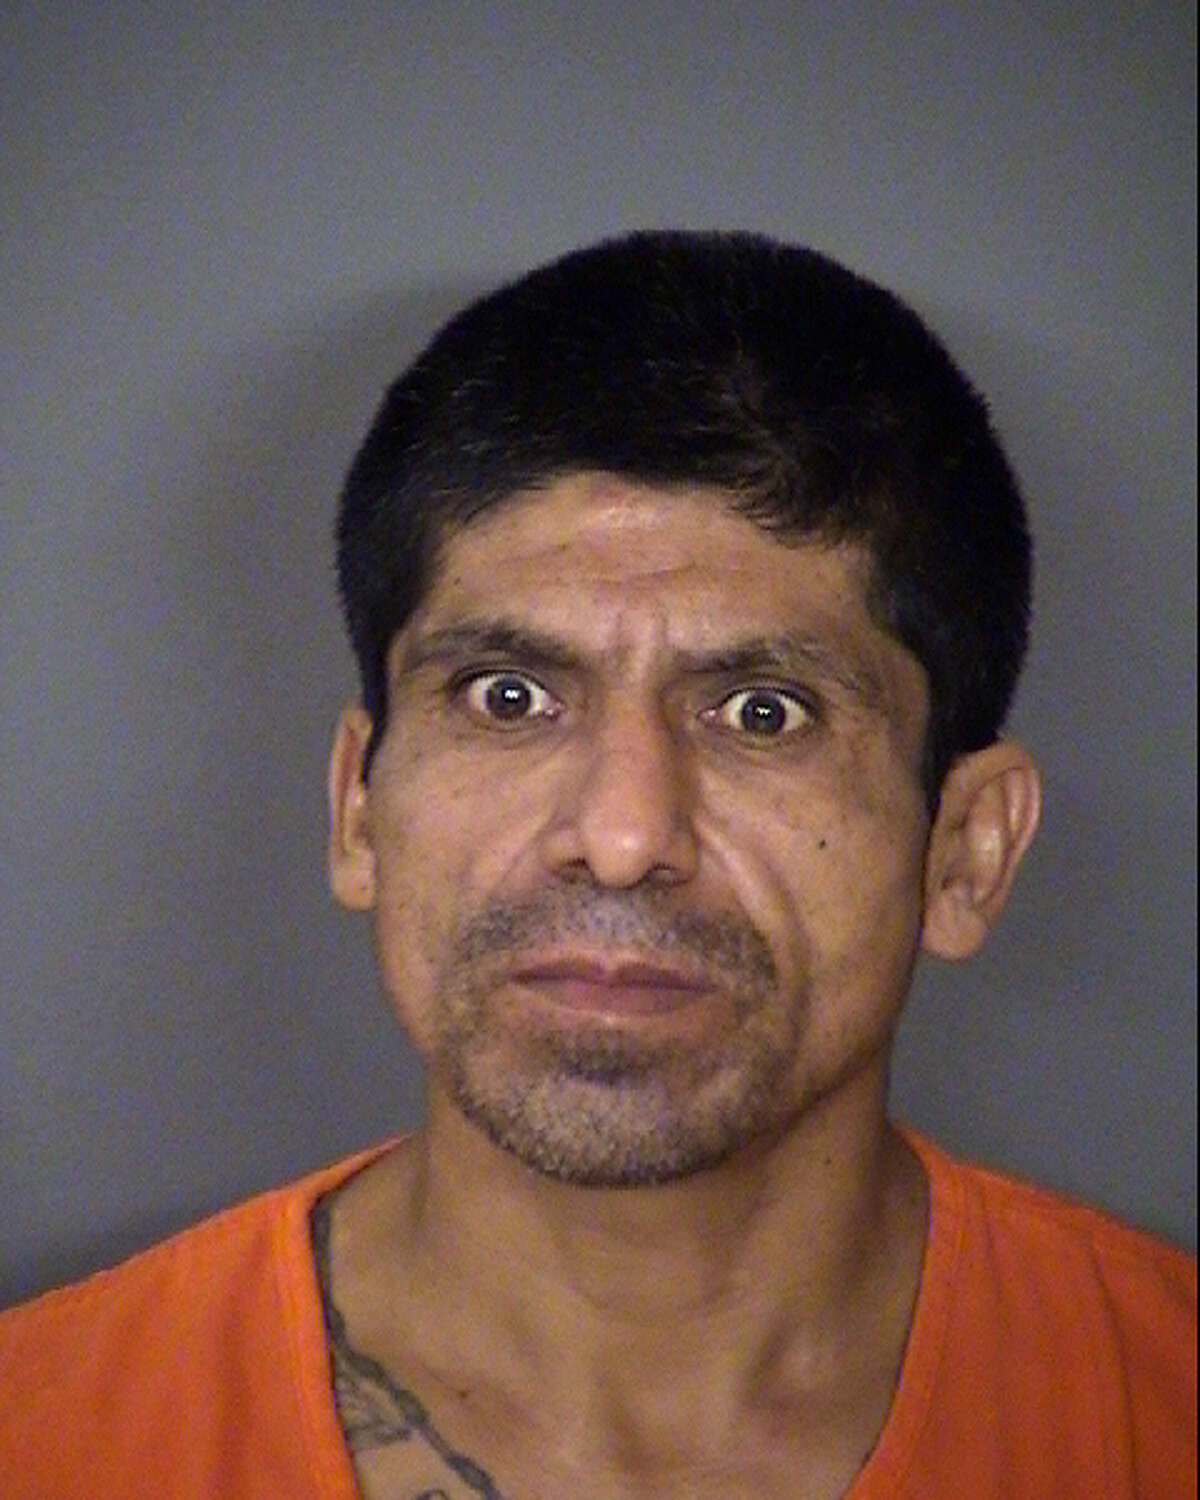 Carlos Esparza, 41, was arrested July 26, 2016, on a first-degree felony charge of aggravated sexual assault of a child.